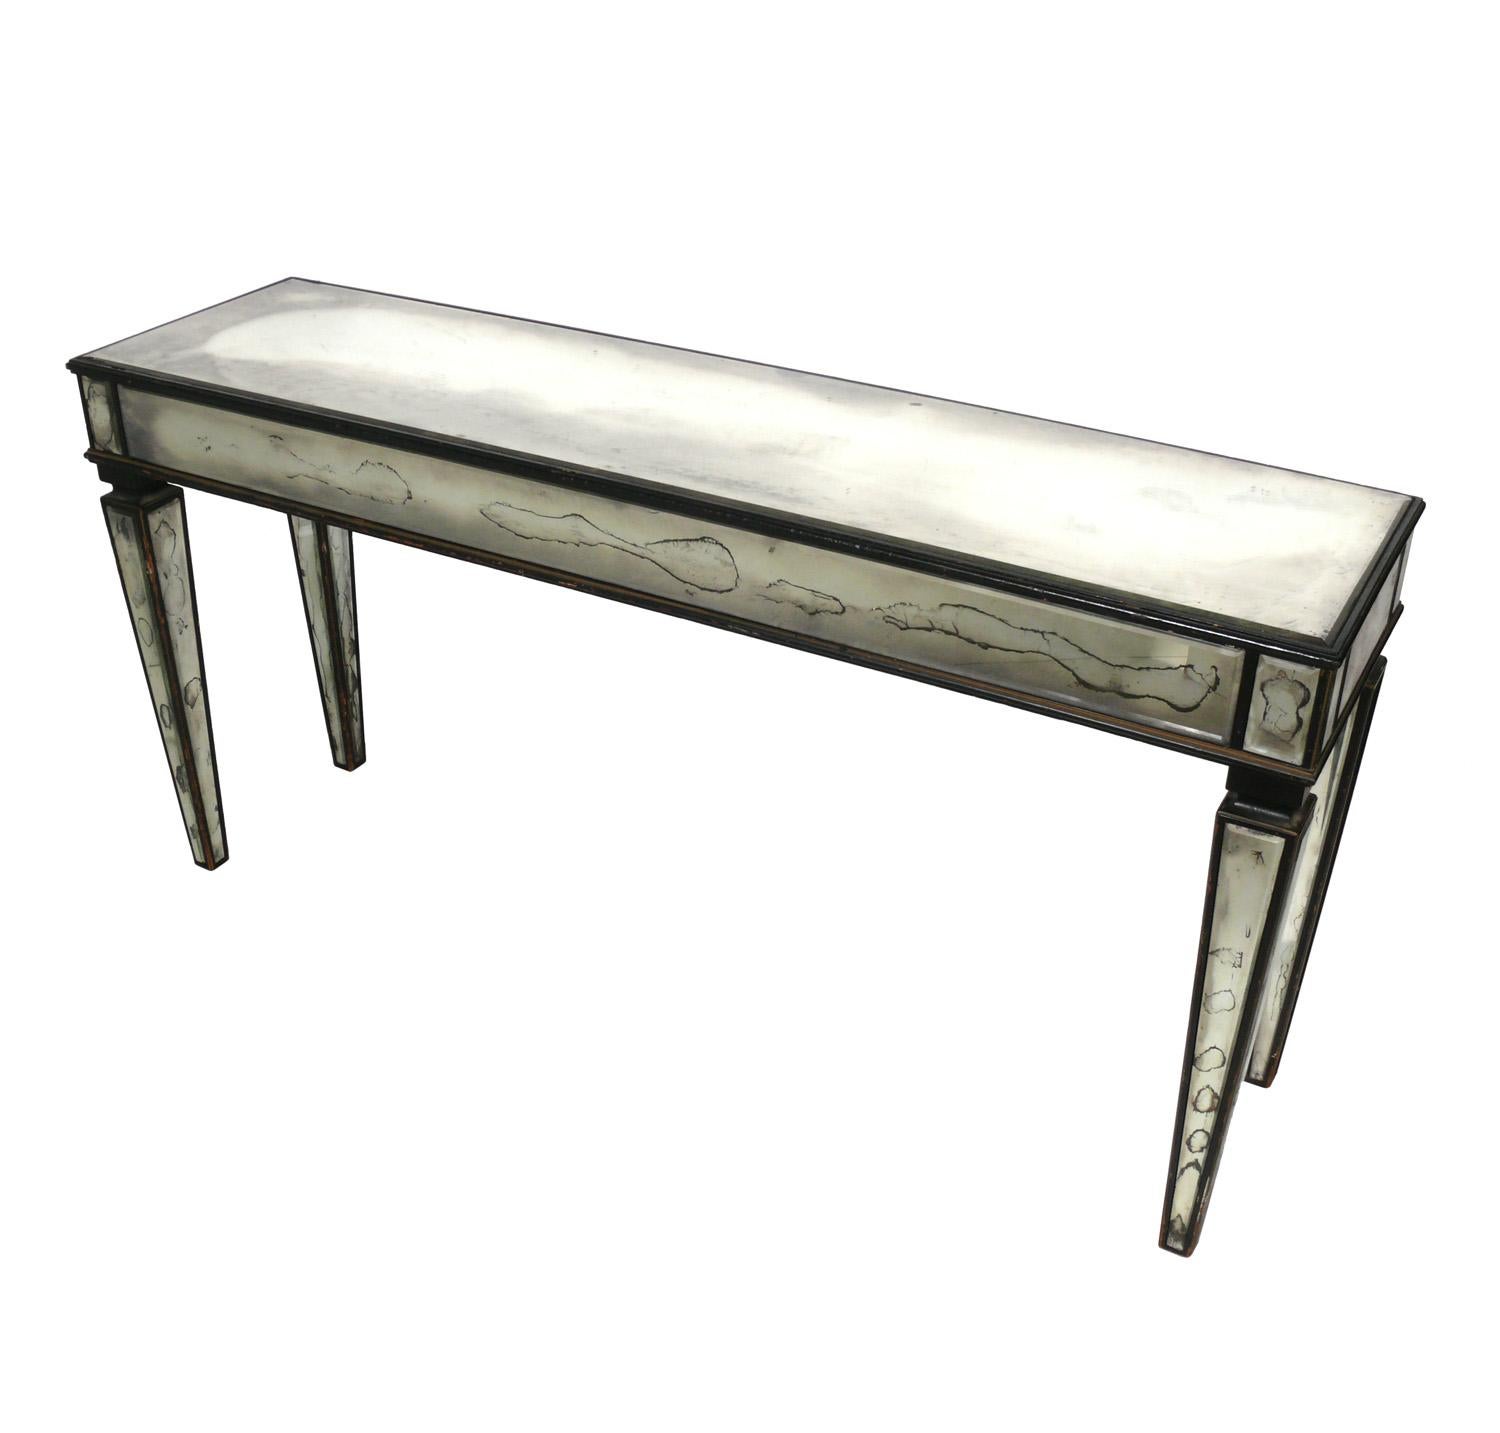 Glamorous mirrored console table, American, circa 1950s. Retains it's wonderful distressed original patina. 
It is a versatile size and can be used as a console or sofa table, or as a bar, desk, or television / media table.